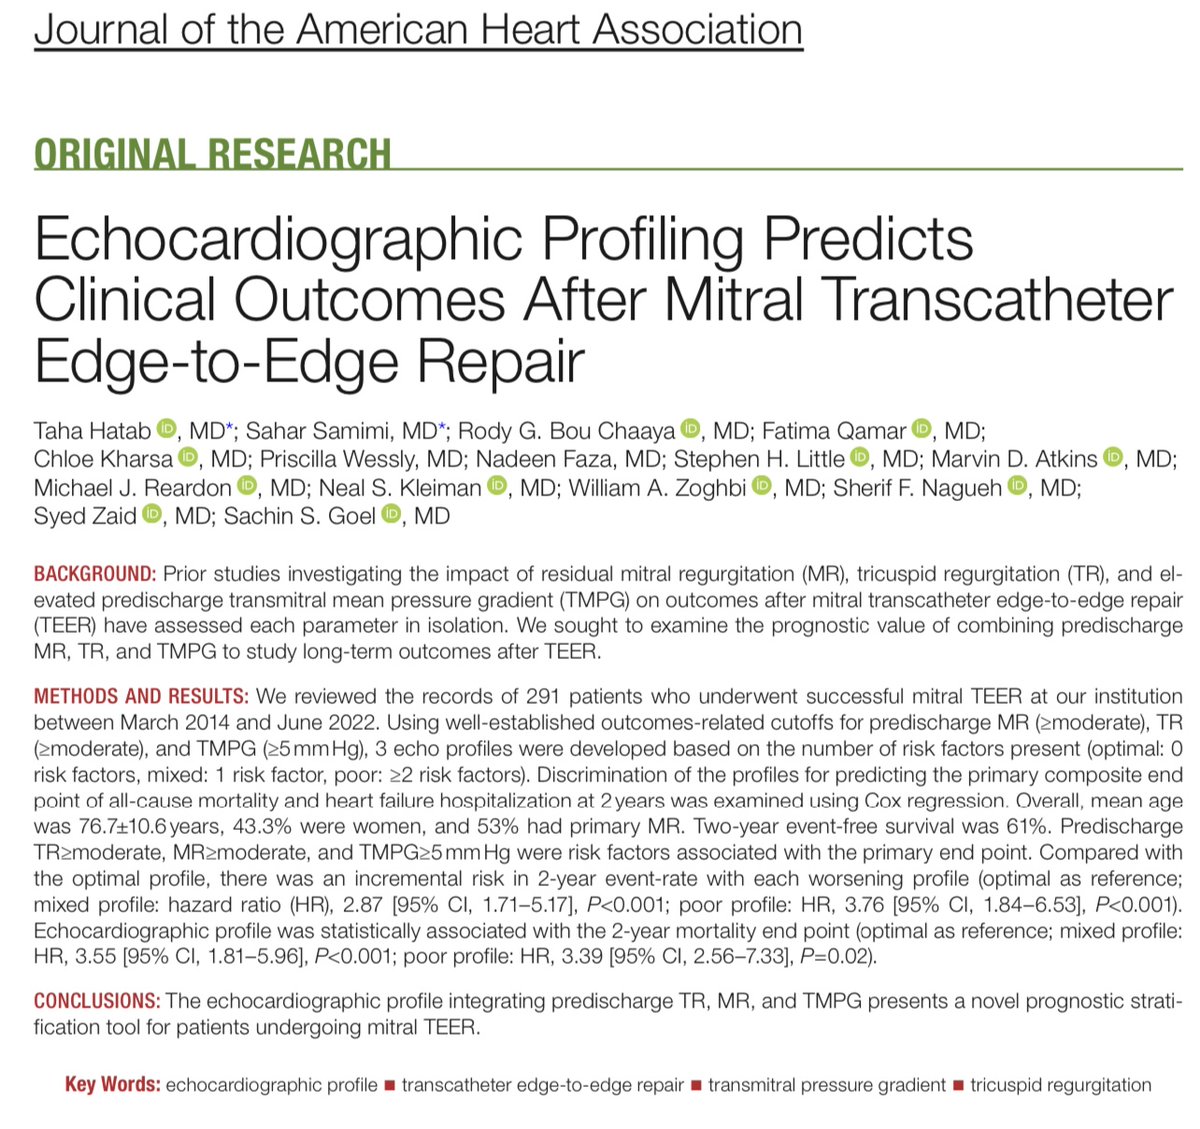 🛑🛑🛑 Check out our work @JAHA_AHA Echocardiographic profile integrating pre-discharge TR, MR, and TMPG presents a novel prognostic stratification tool for patients undergoing mitral TEER. First of many co-authored with @SaharSamimii! ahajournals.org/doi/10.1161/JA… 🛑🛑🛑